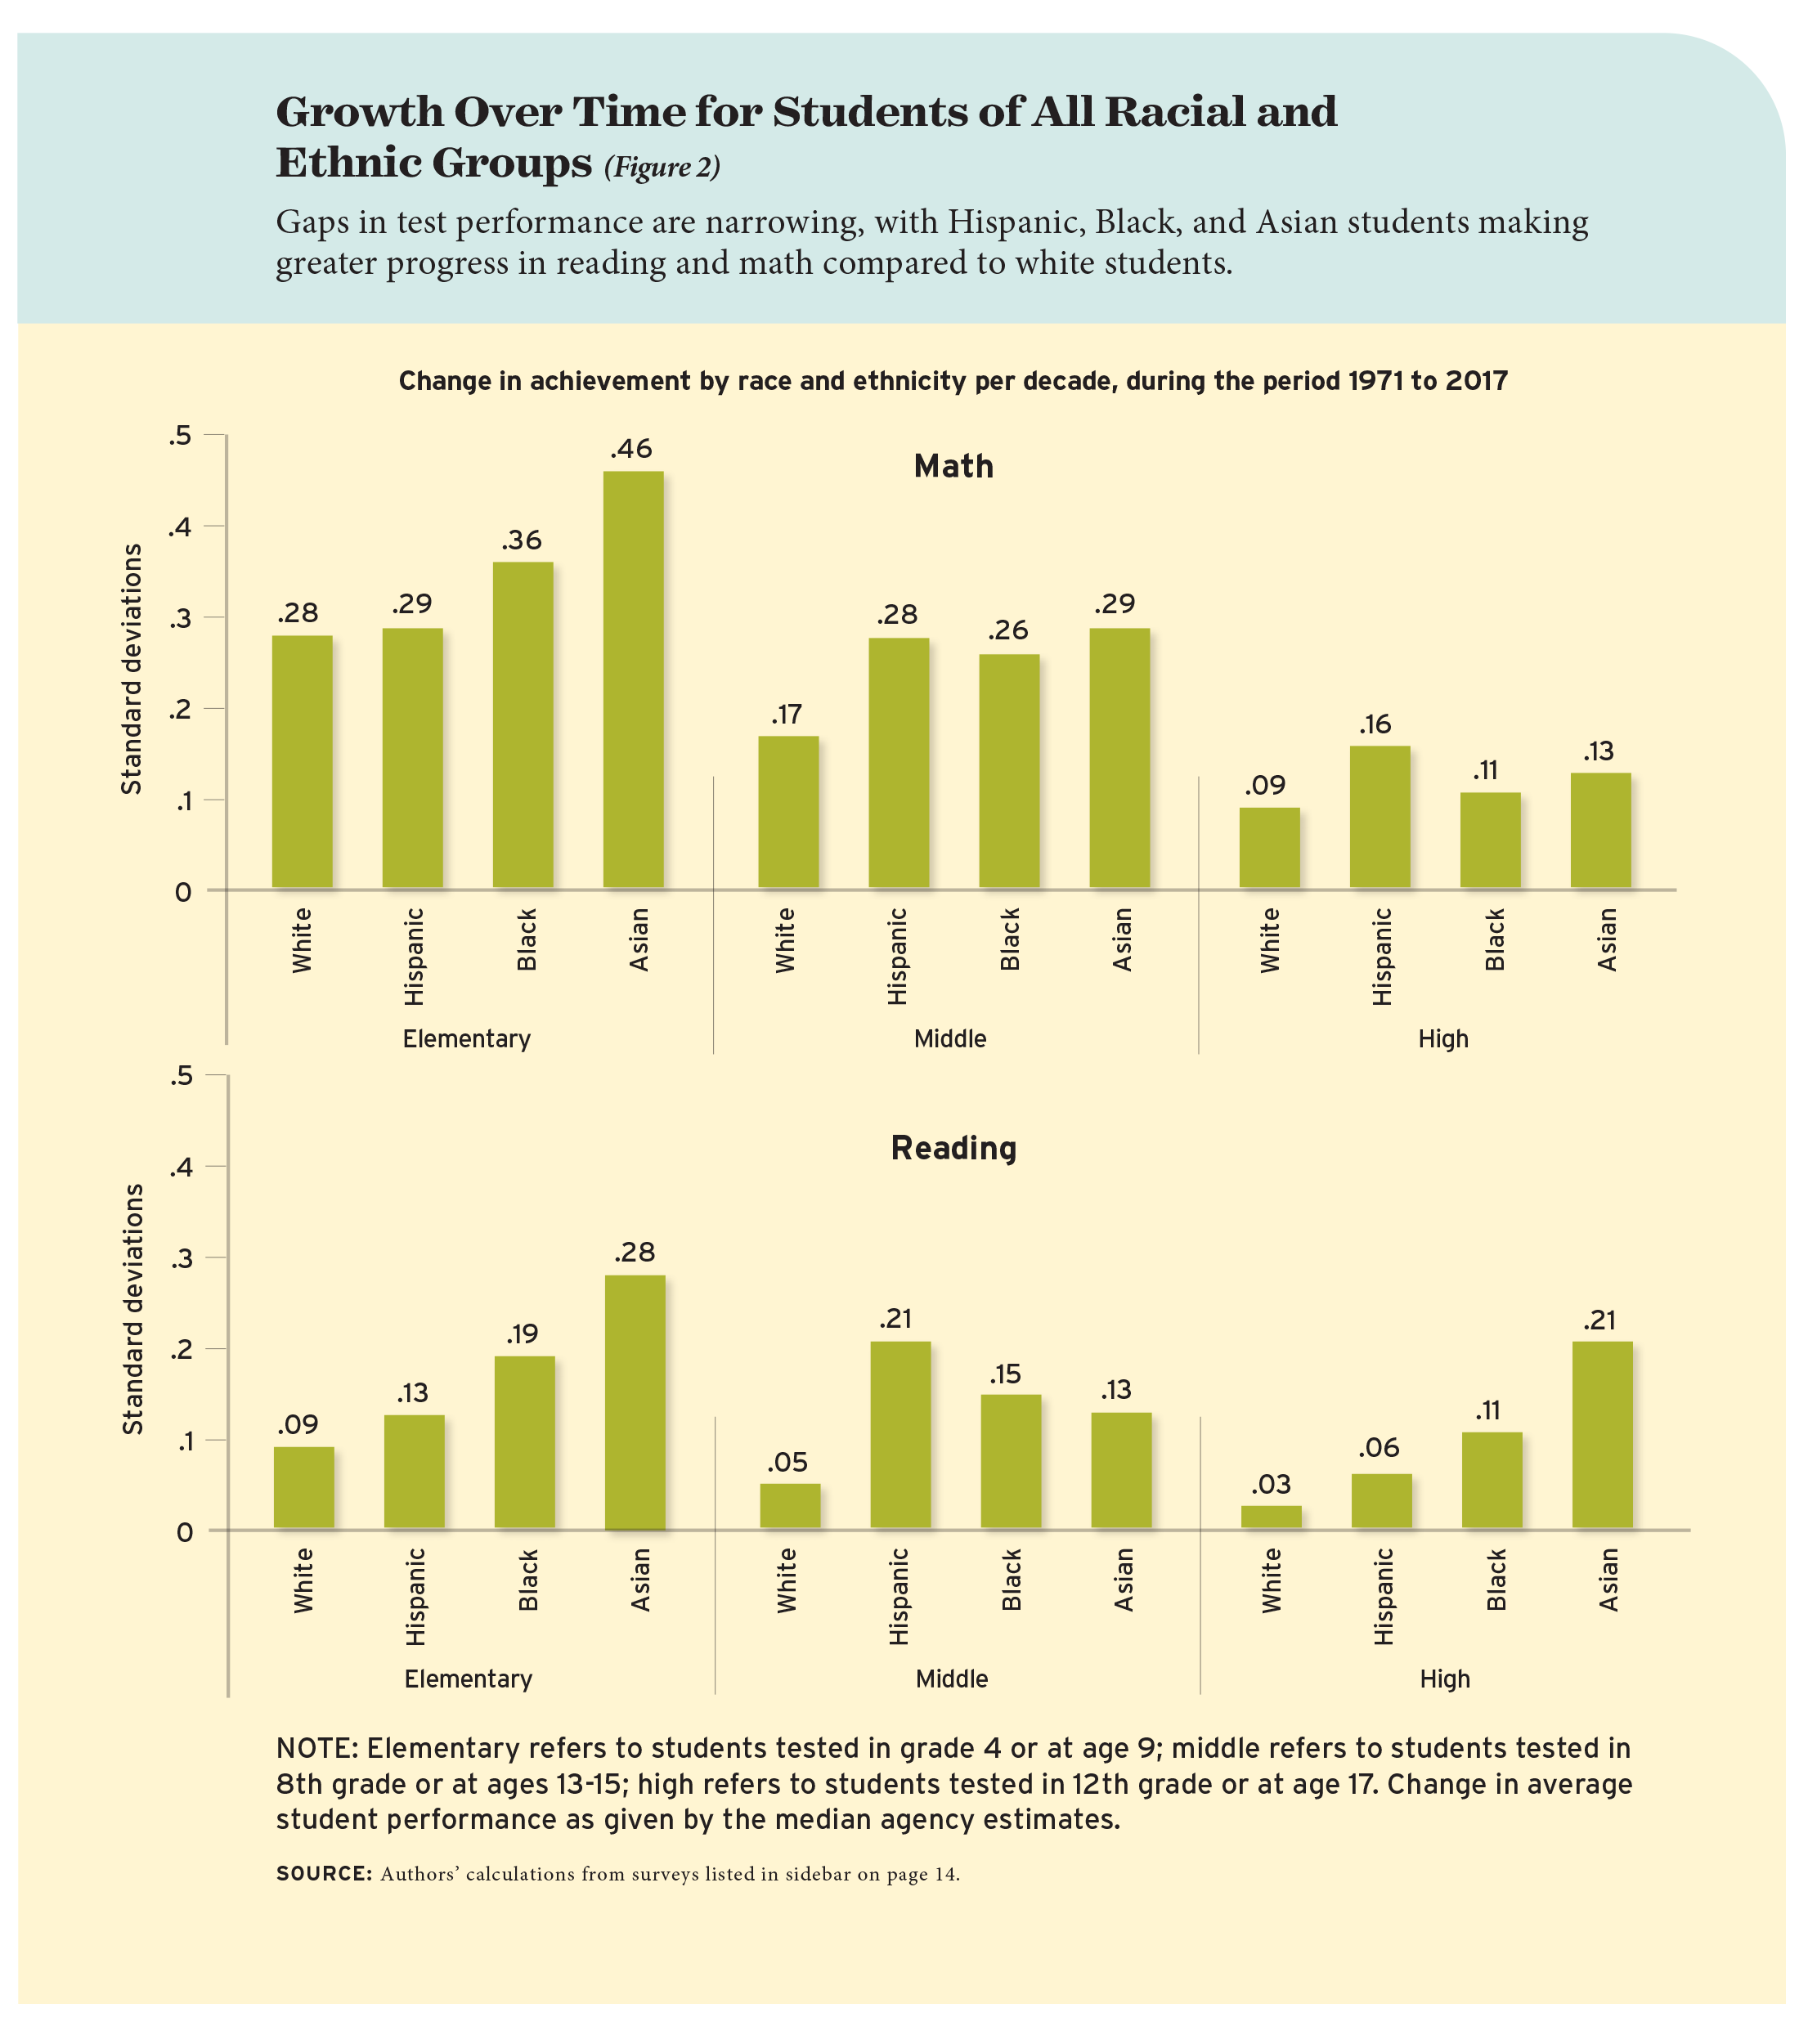 Growth Over Time for Students of All Racial and Ethnic Groups